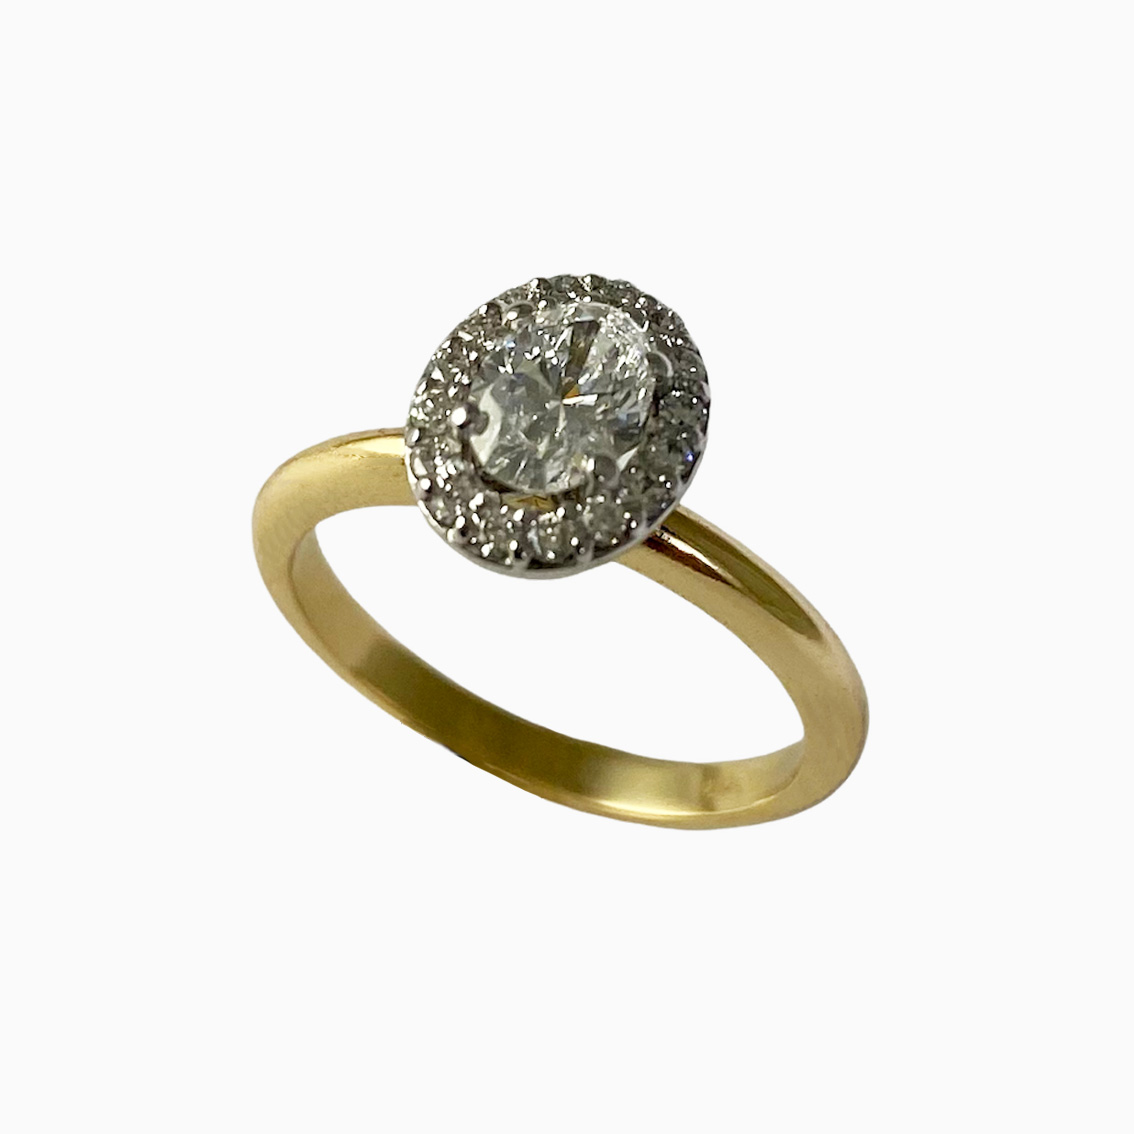 Contemporary 18ct. Yellow and white gold diamond set halo ring